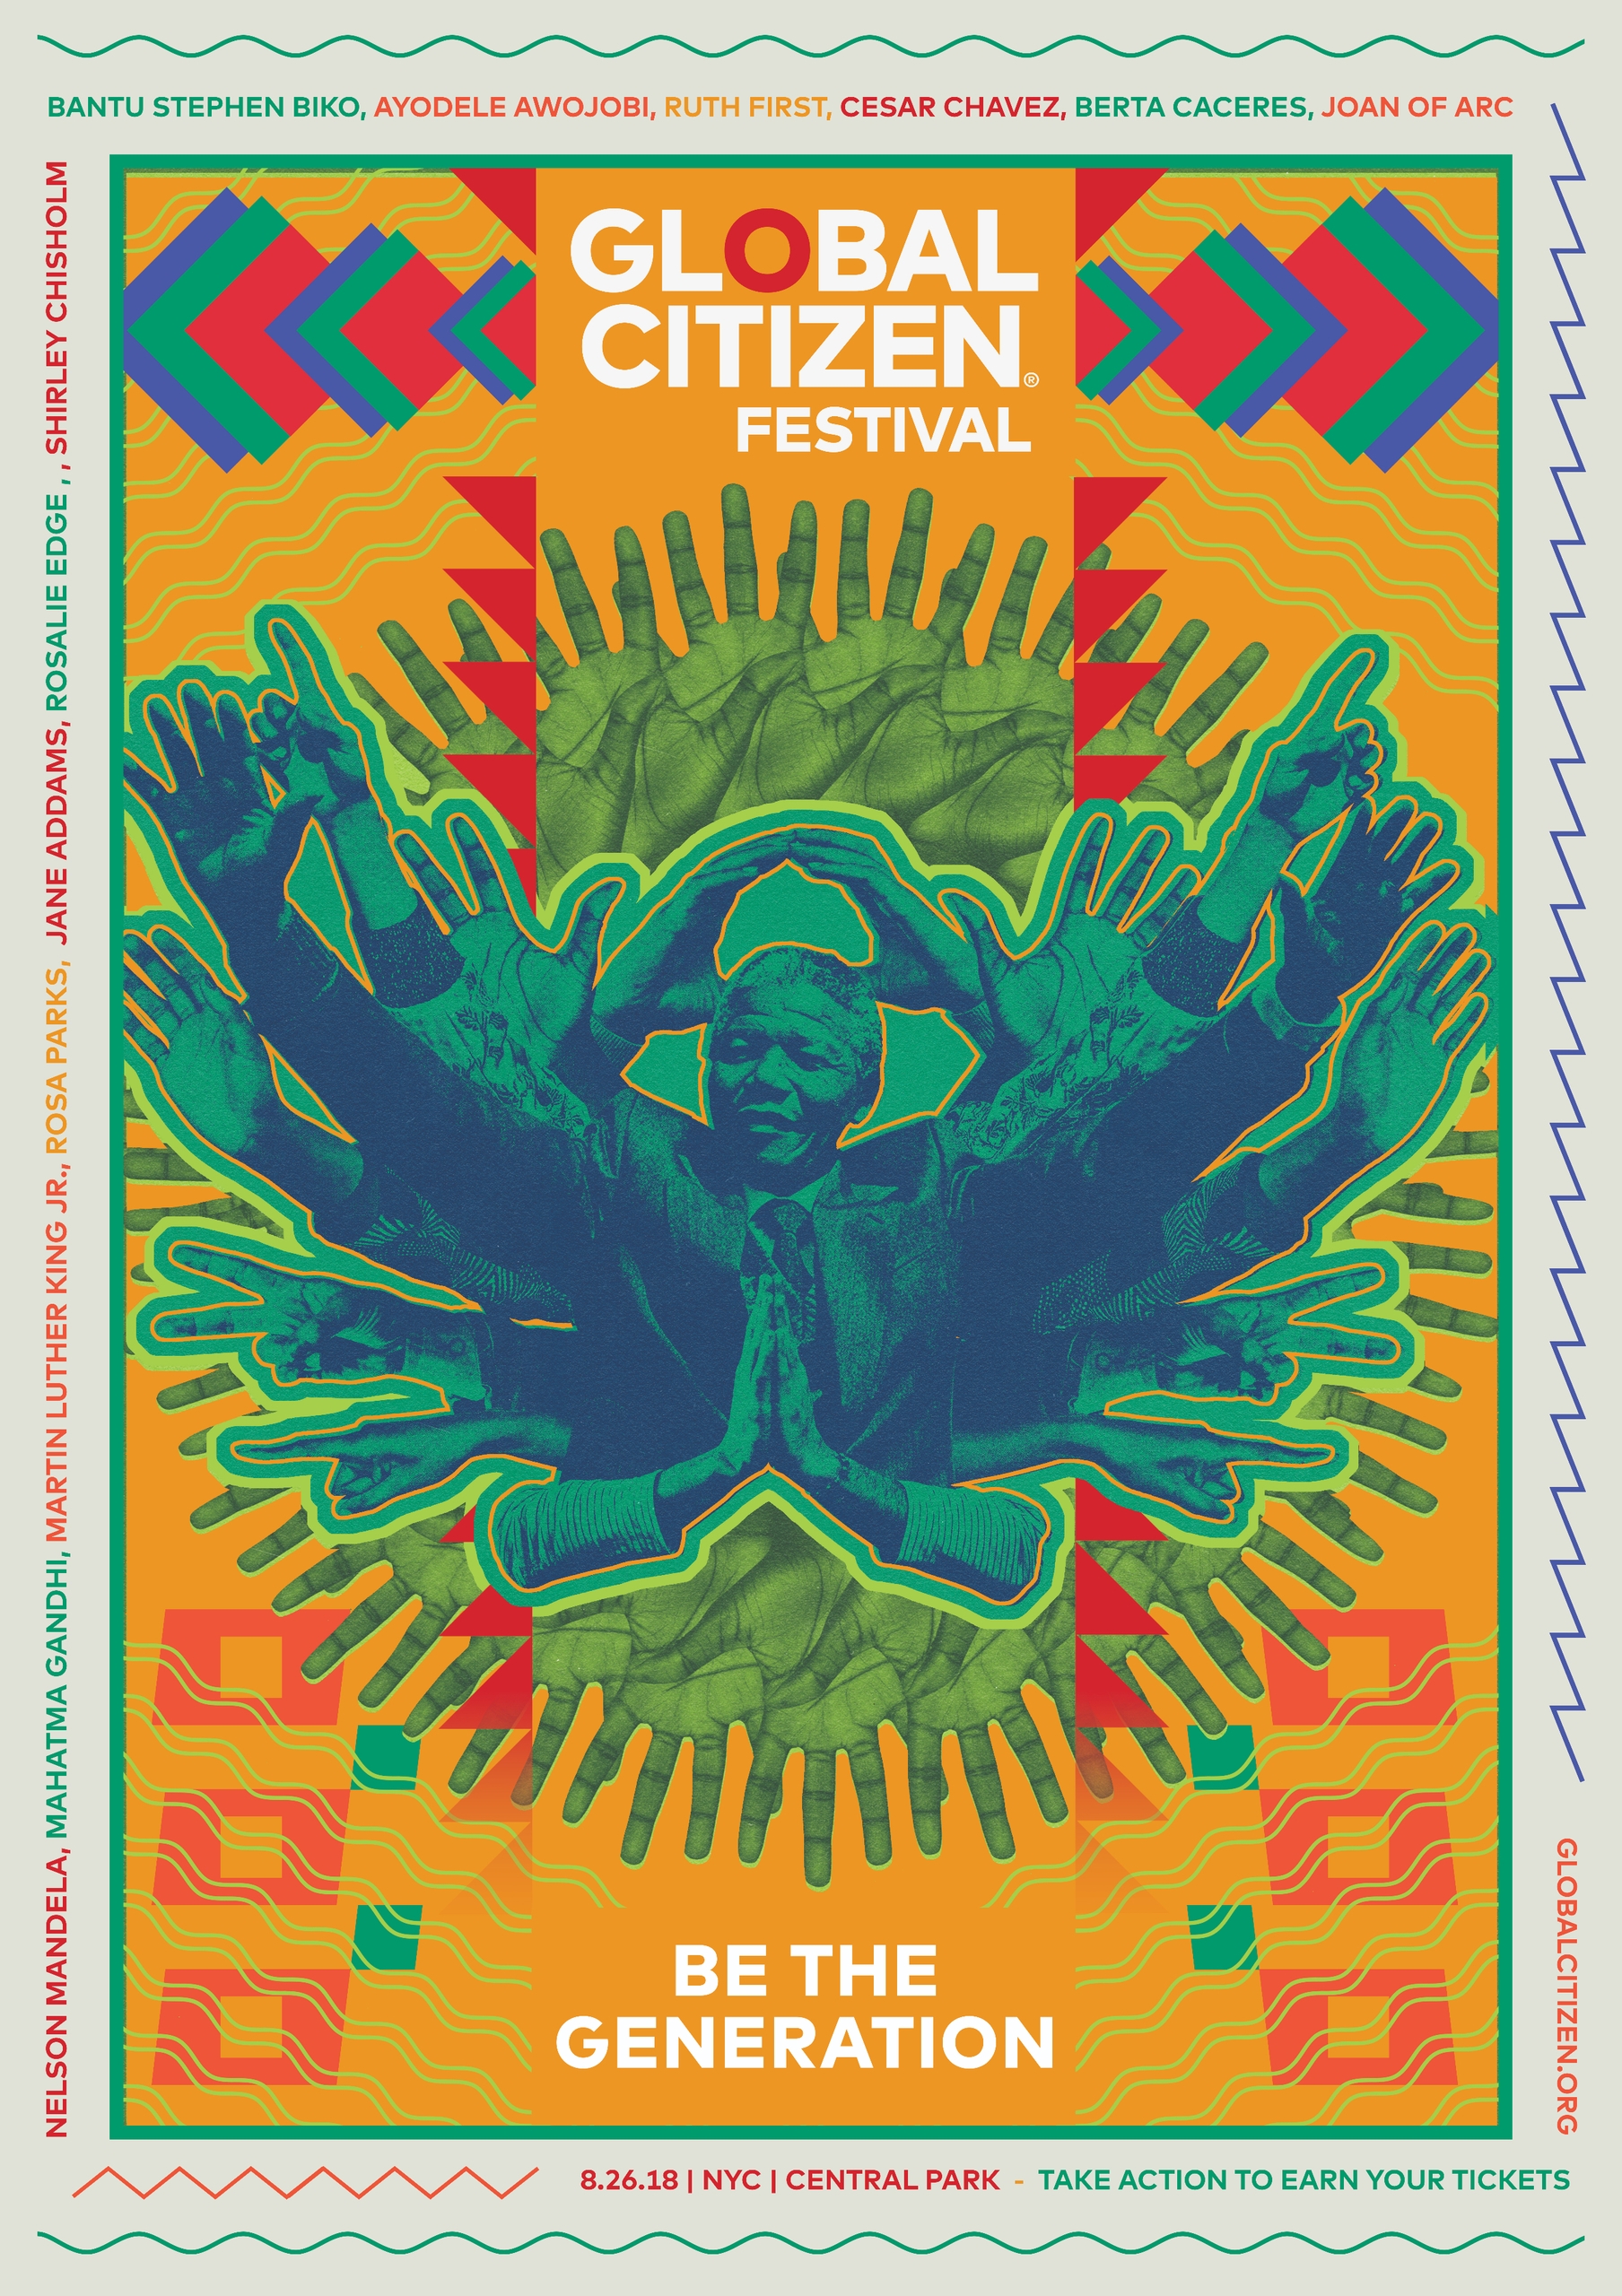 Be the Generation Global Citizen submission by @artandsuchevan